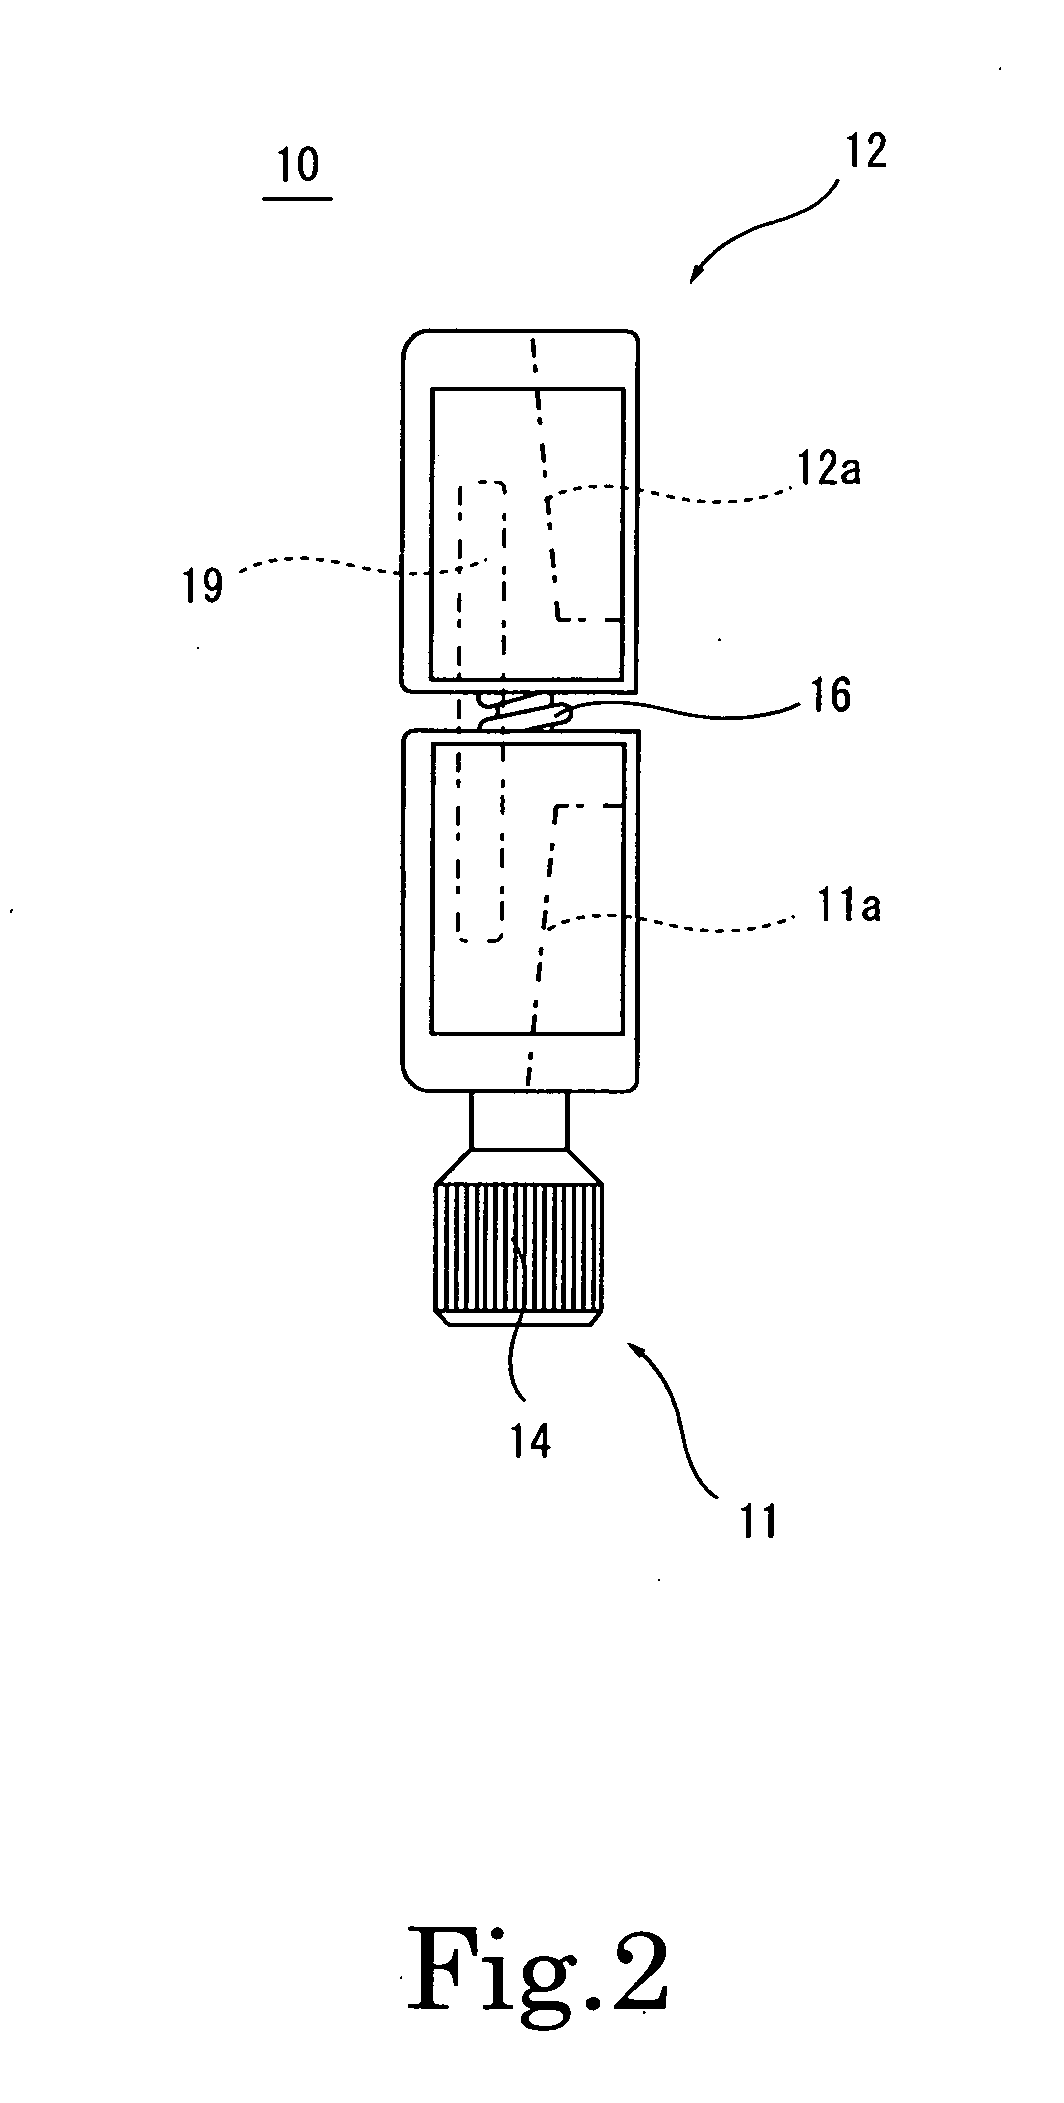 Sound deadening tool and sound deadening musical performance tool